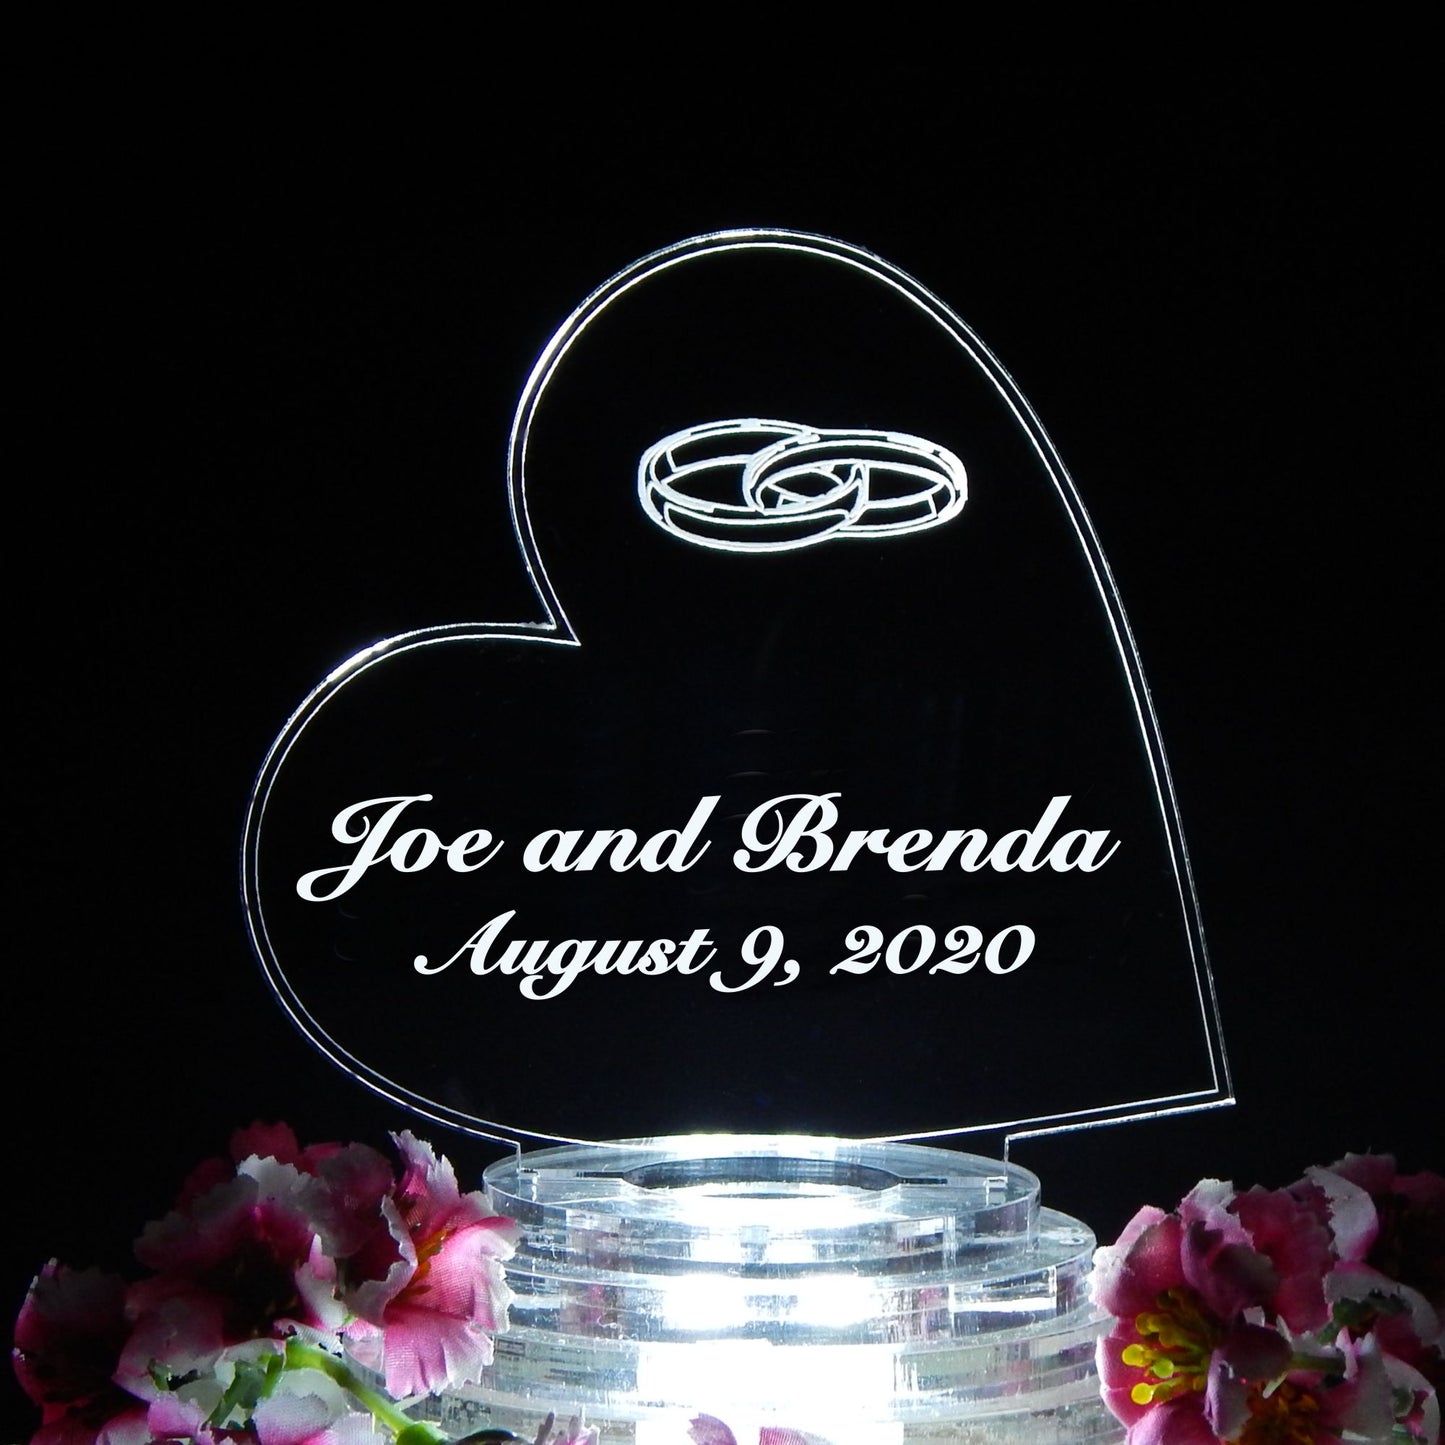 side heart shaped acrylic cake topper designed with wedding rings and engraved with names and date